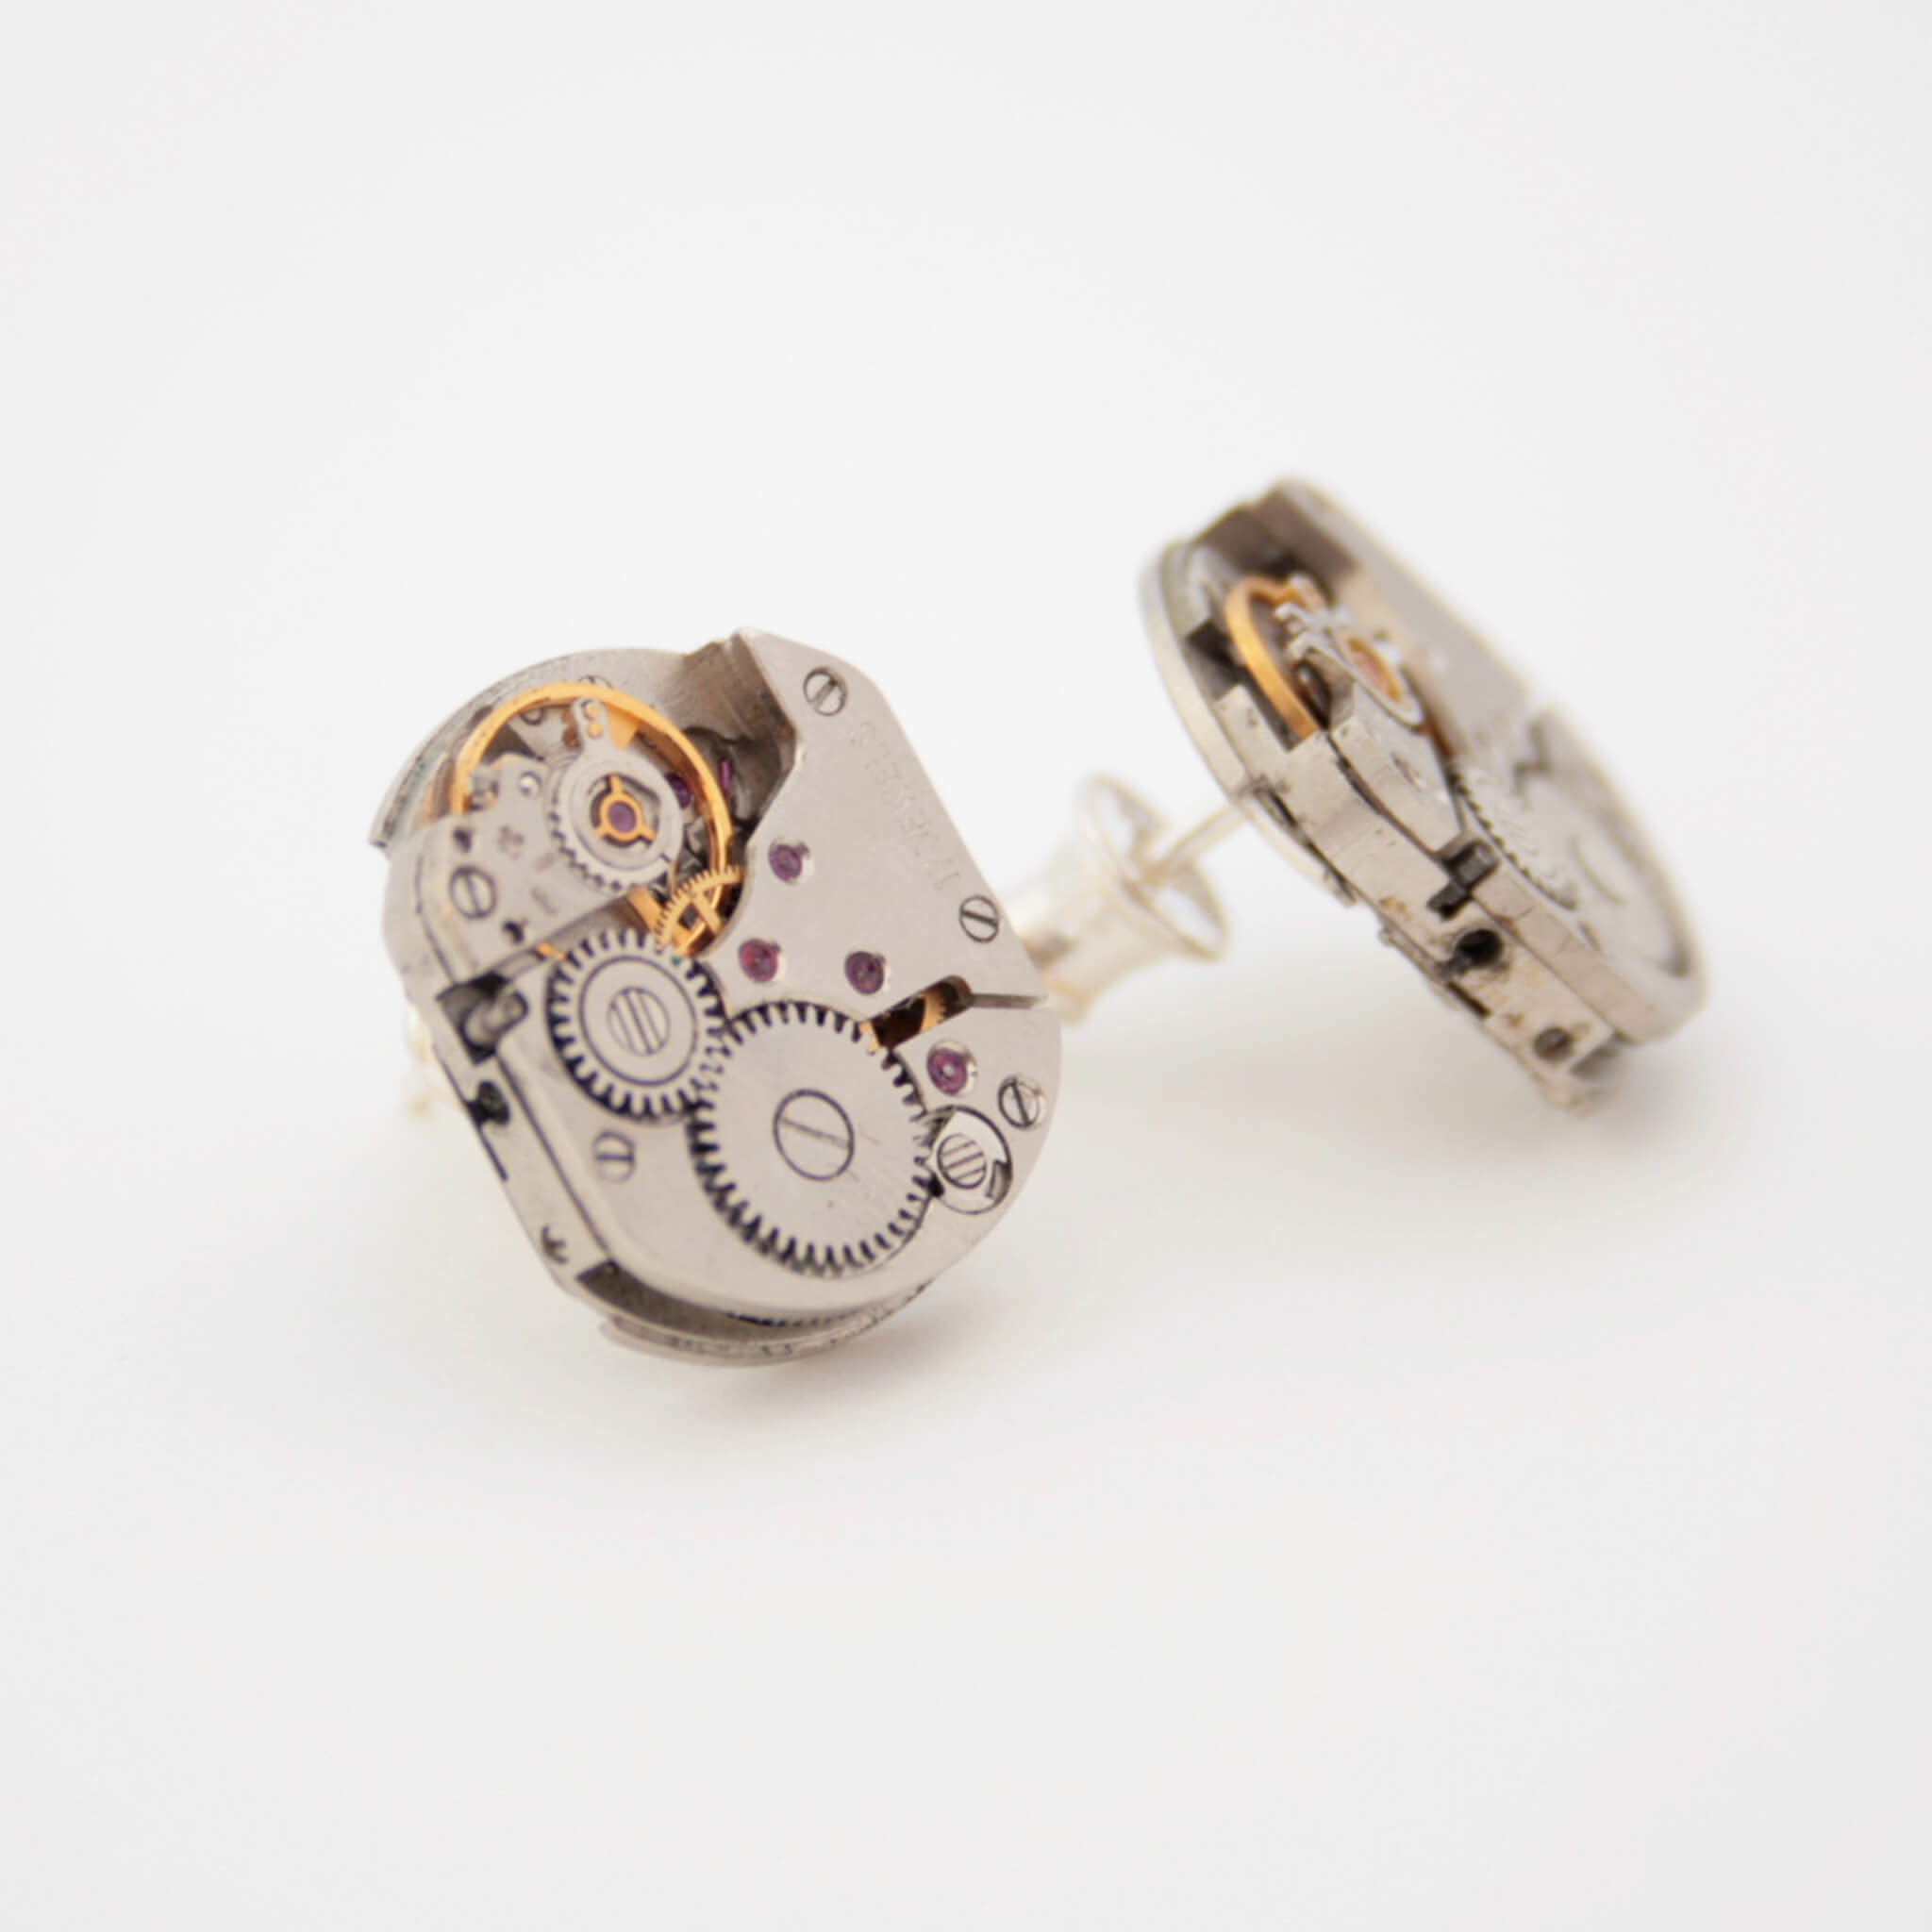 Rectangle Watch movements turned into stud earrings lying on a grey paper